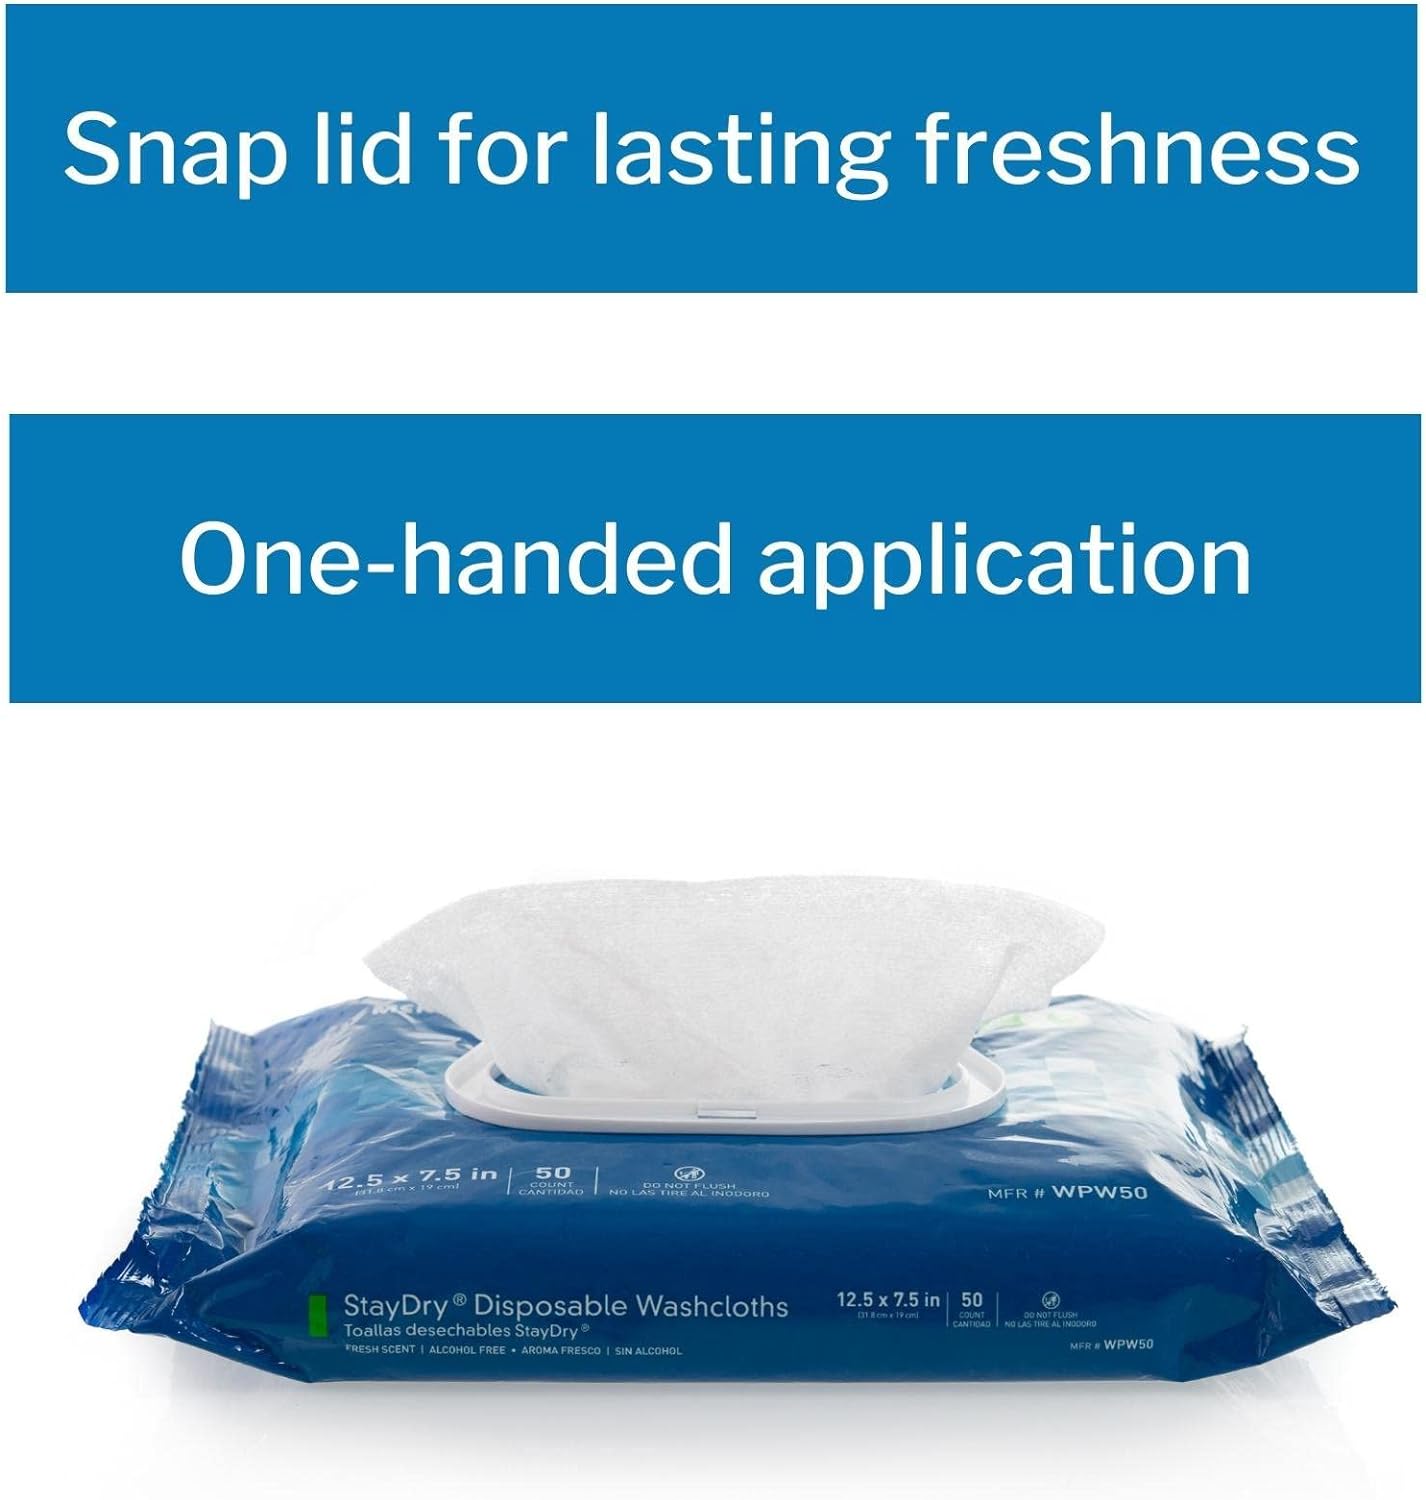 McKesson StayDry Disposable Wipe - Large Adult Body and Incontinence Washcloths with Aloe and Vitamin E, Alcohol-Free, 100 Wipes Per Pack